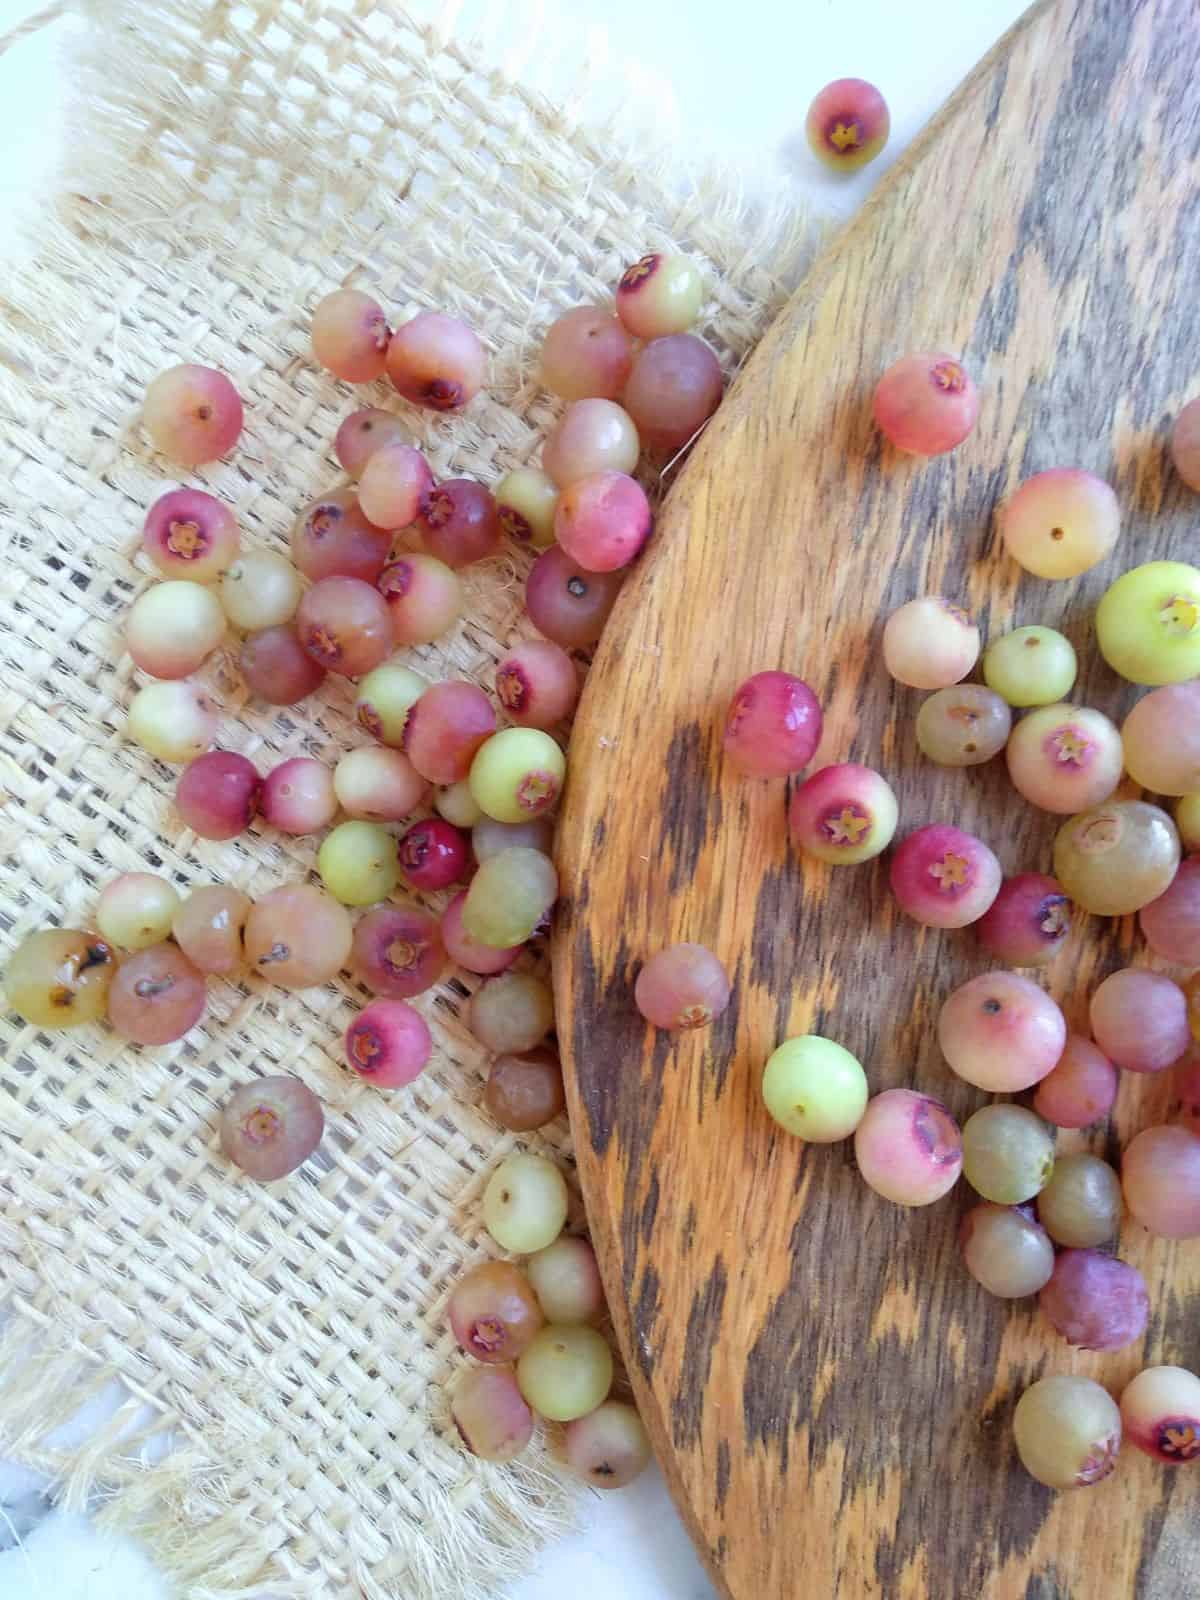 Pink colored blueberries called pink lemonade are on a wood cutting board and a piece of burlap next to the board.